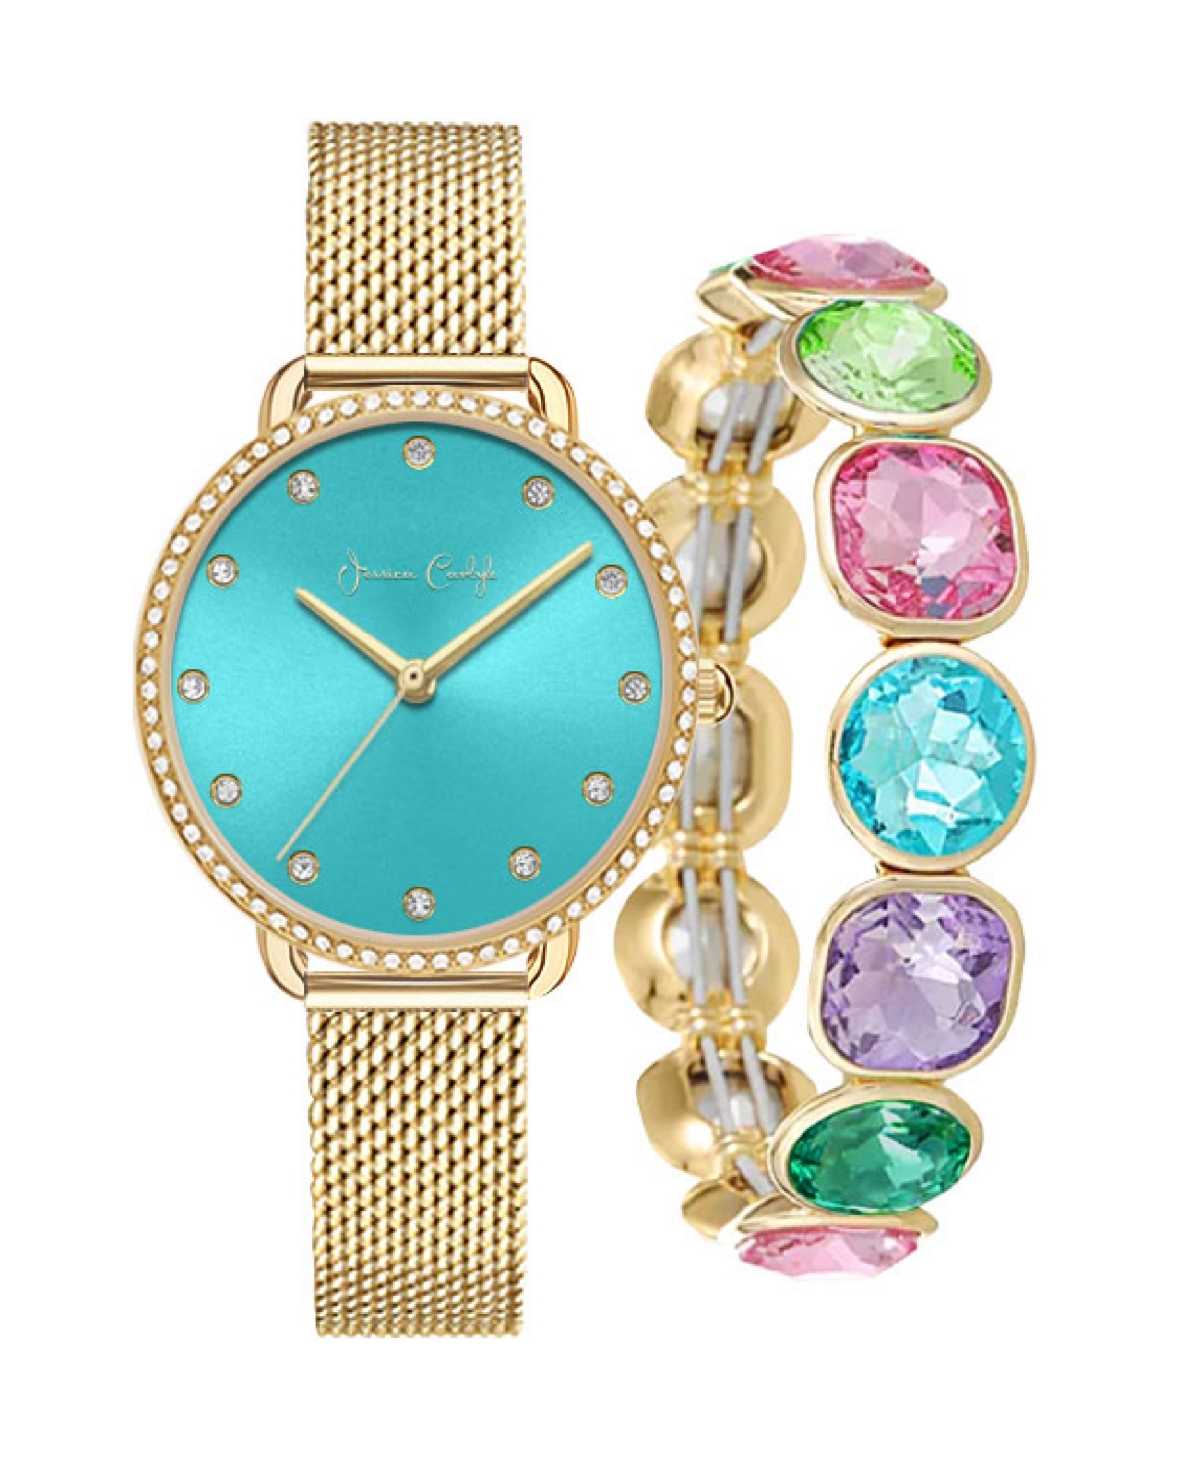 Jessica Carlyle Women's Quartz Gold-tone Alloy Watch 34mm Gift Set In Shiny Gold,turquoise Sunray